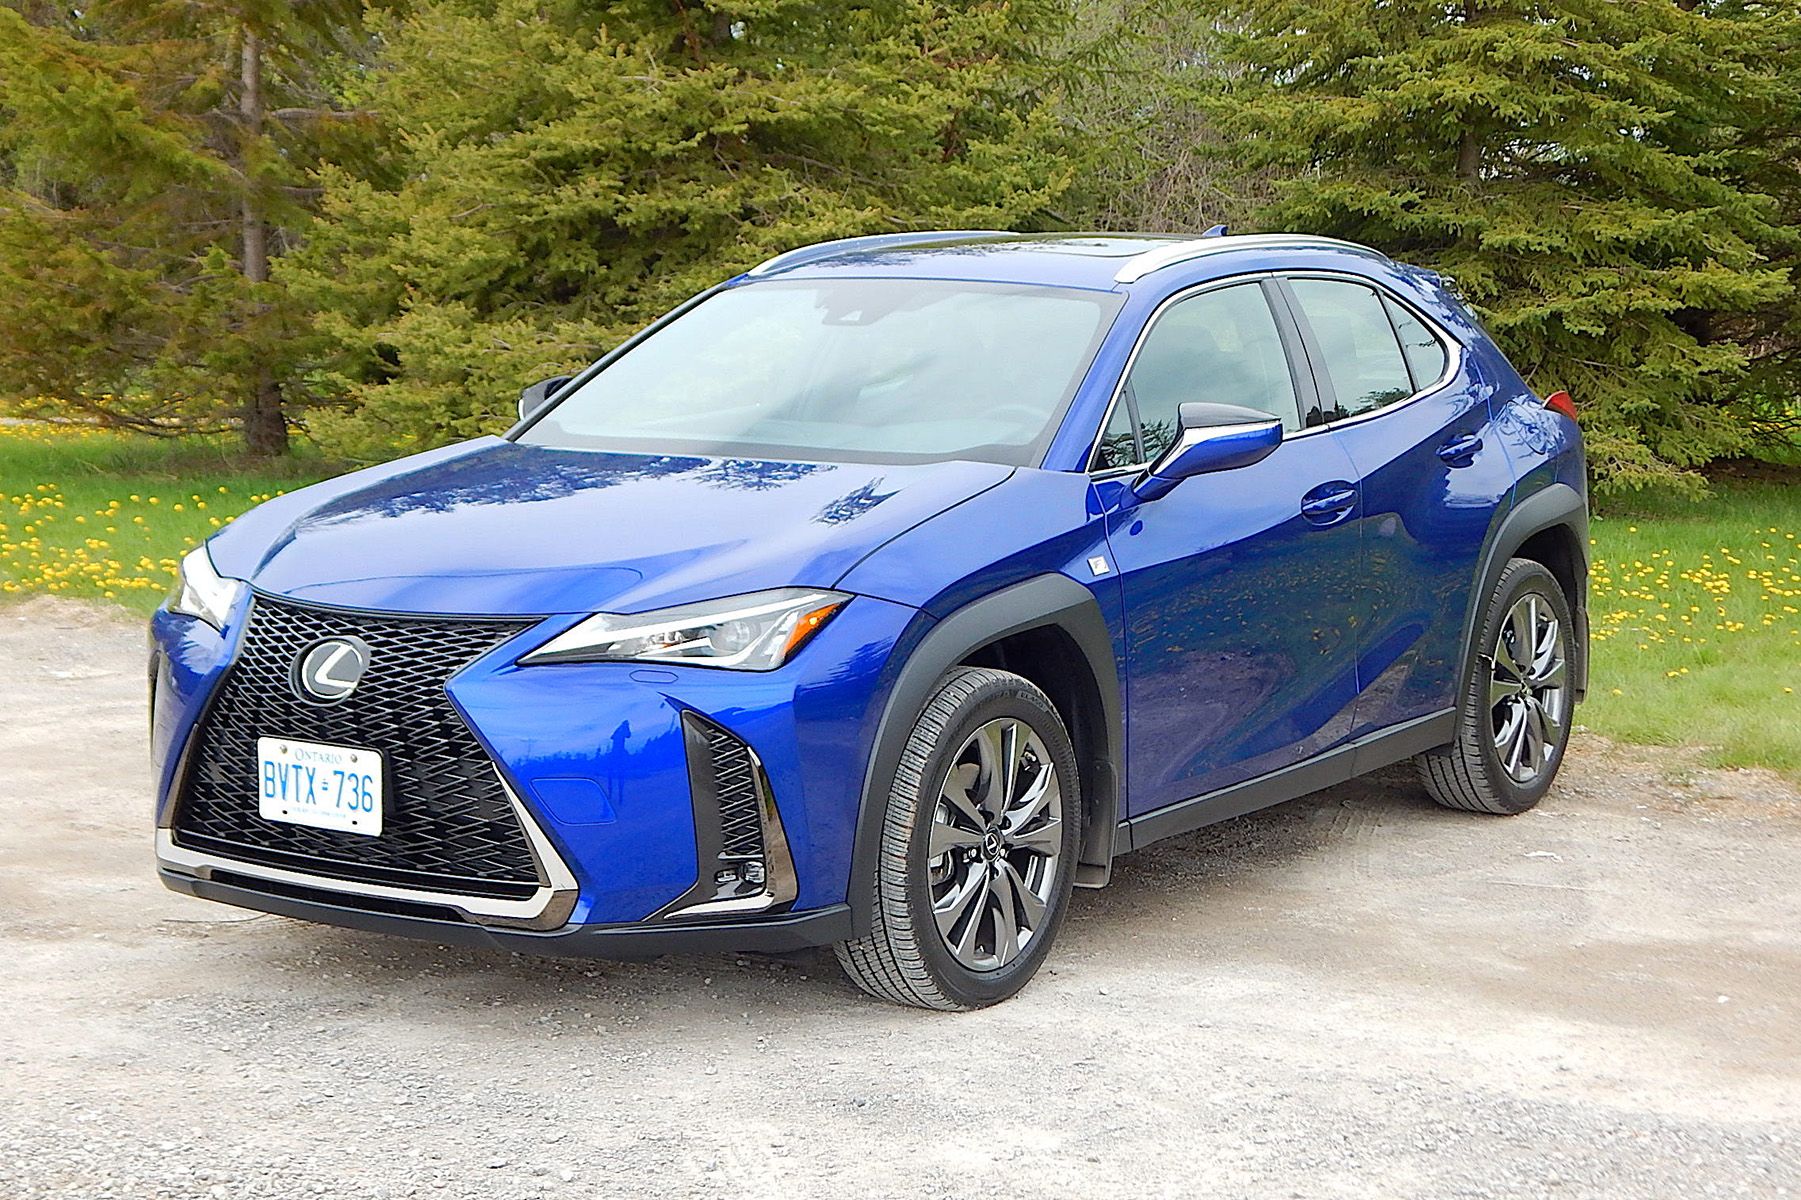 2019 Lexus UX 200 Review – Our 7-Day Test Drive of this Amazing